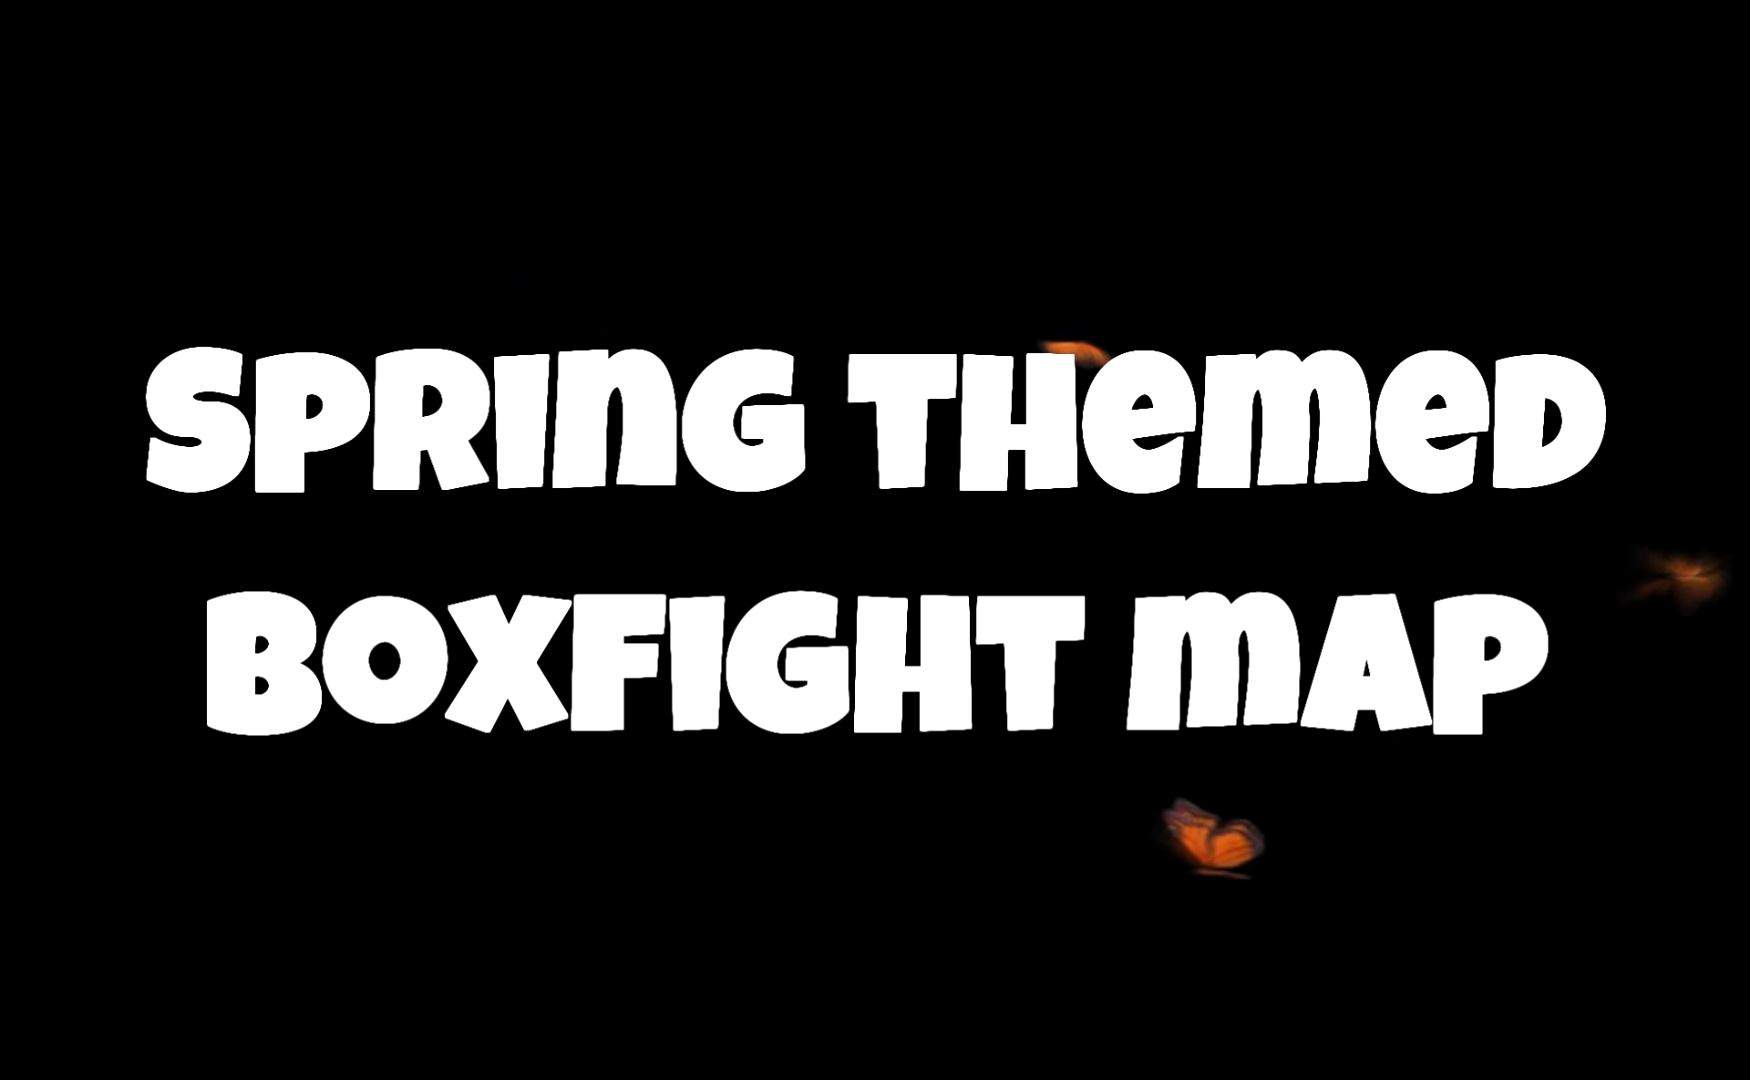 SPRING THEMED BOXFIGHTS!